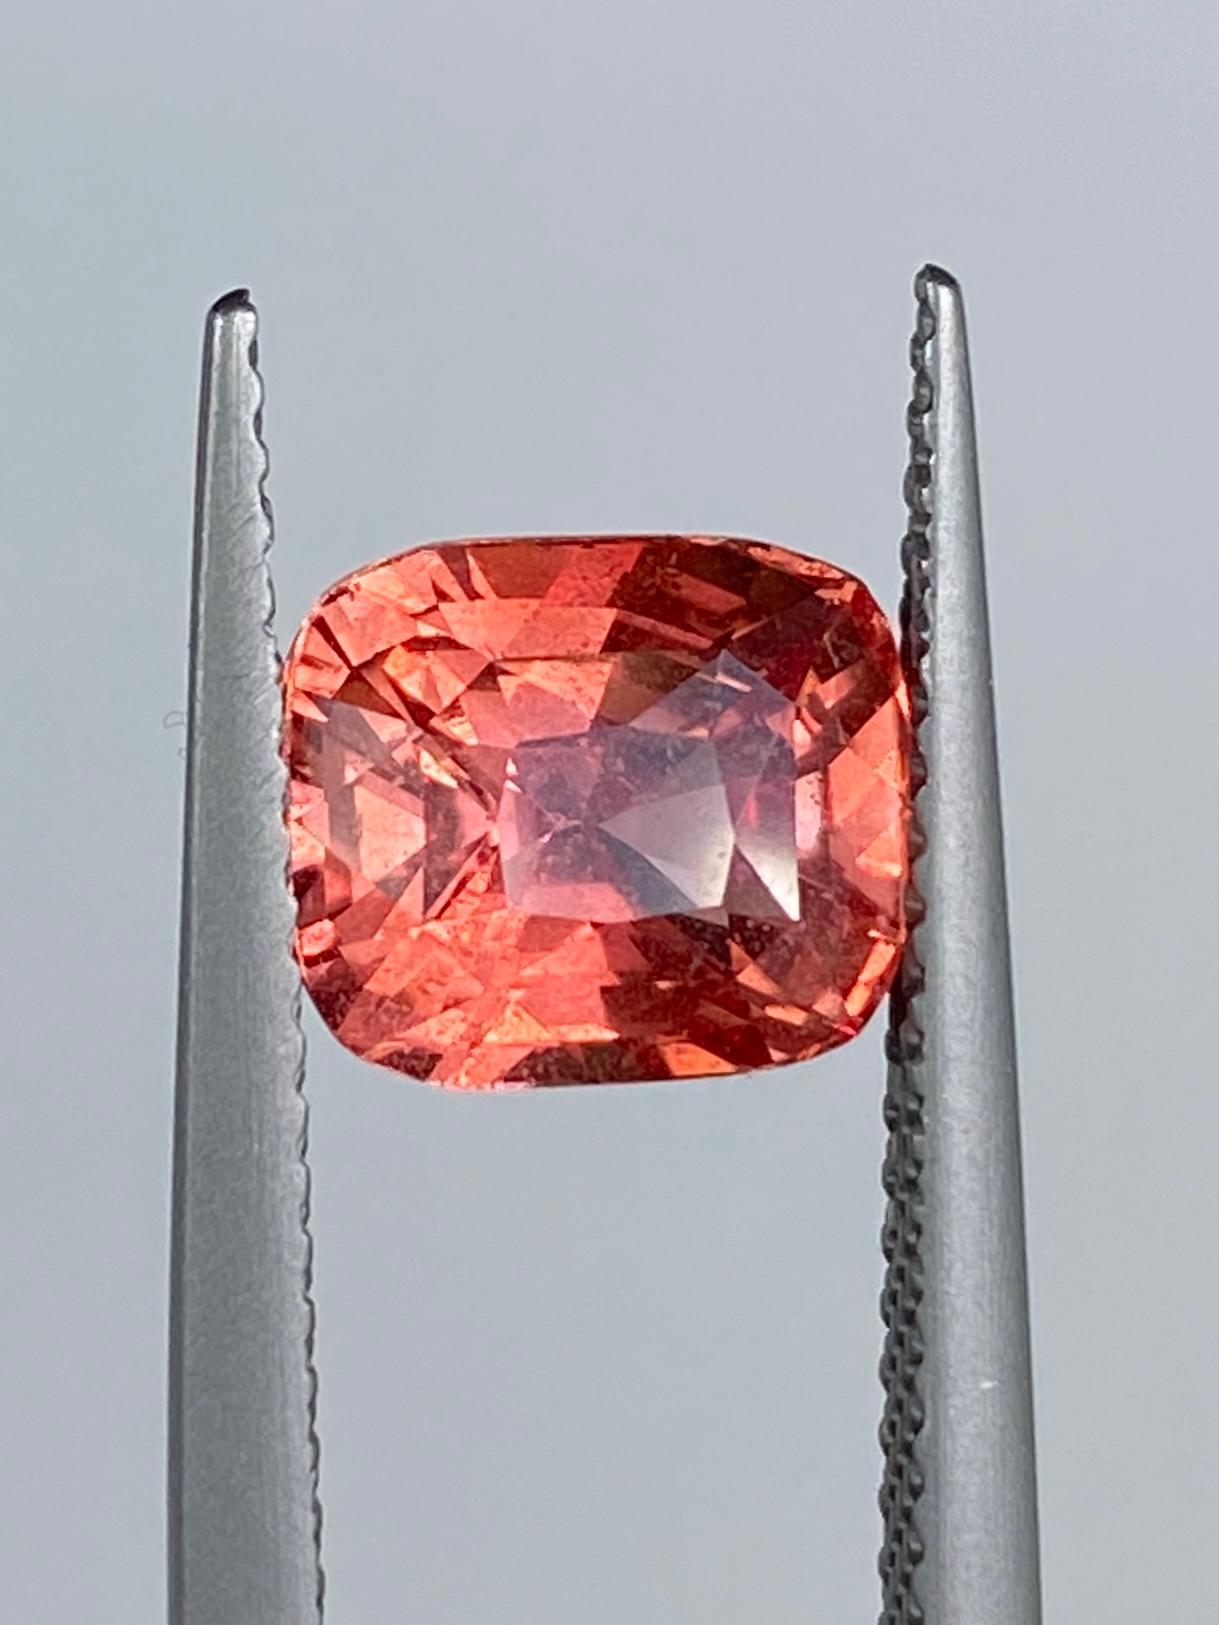 The Sapphire Merchant proudly presents this 2.89ct Padparadscha Sapphire in an elegant cushion cut. Measuring 7.93 x 6.84 x 5.51ct, its impressive size is perfect for a custom piece of jewelry. Sourced from Sri Lanka (Ceylon), renowned for its